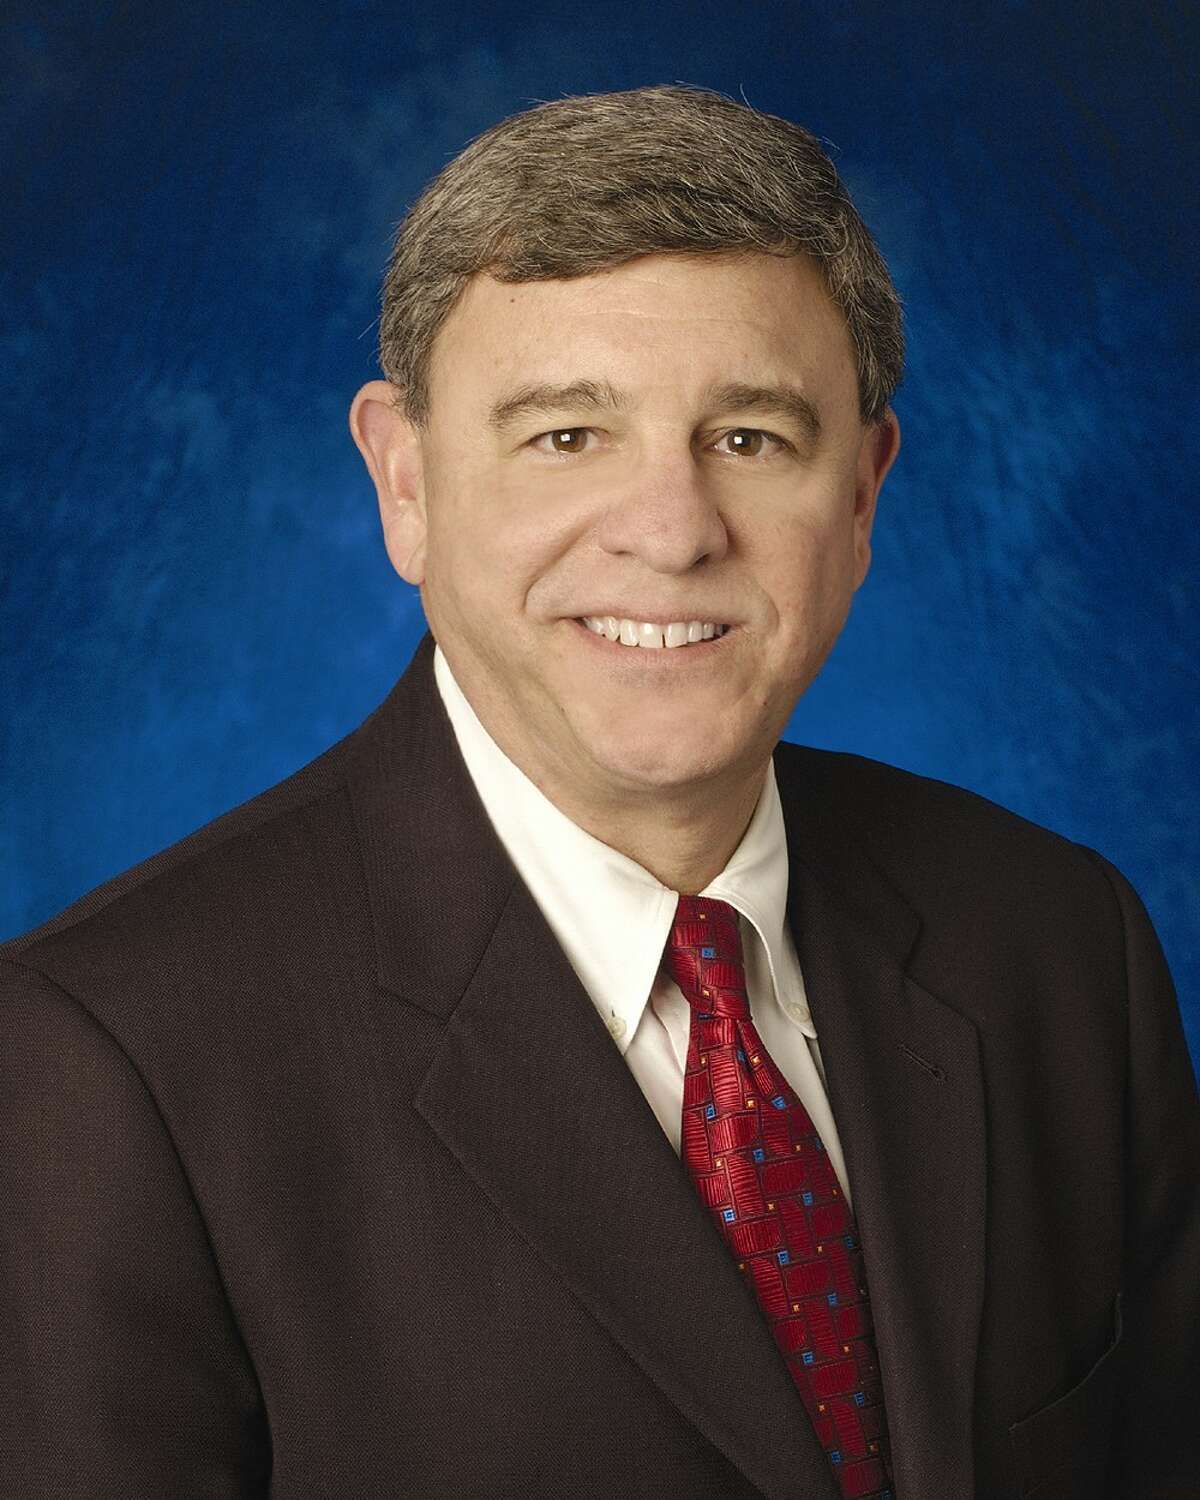 Michael Covert, who has led a California health care system, will be CEO of a Houston system.